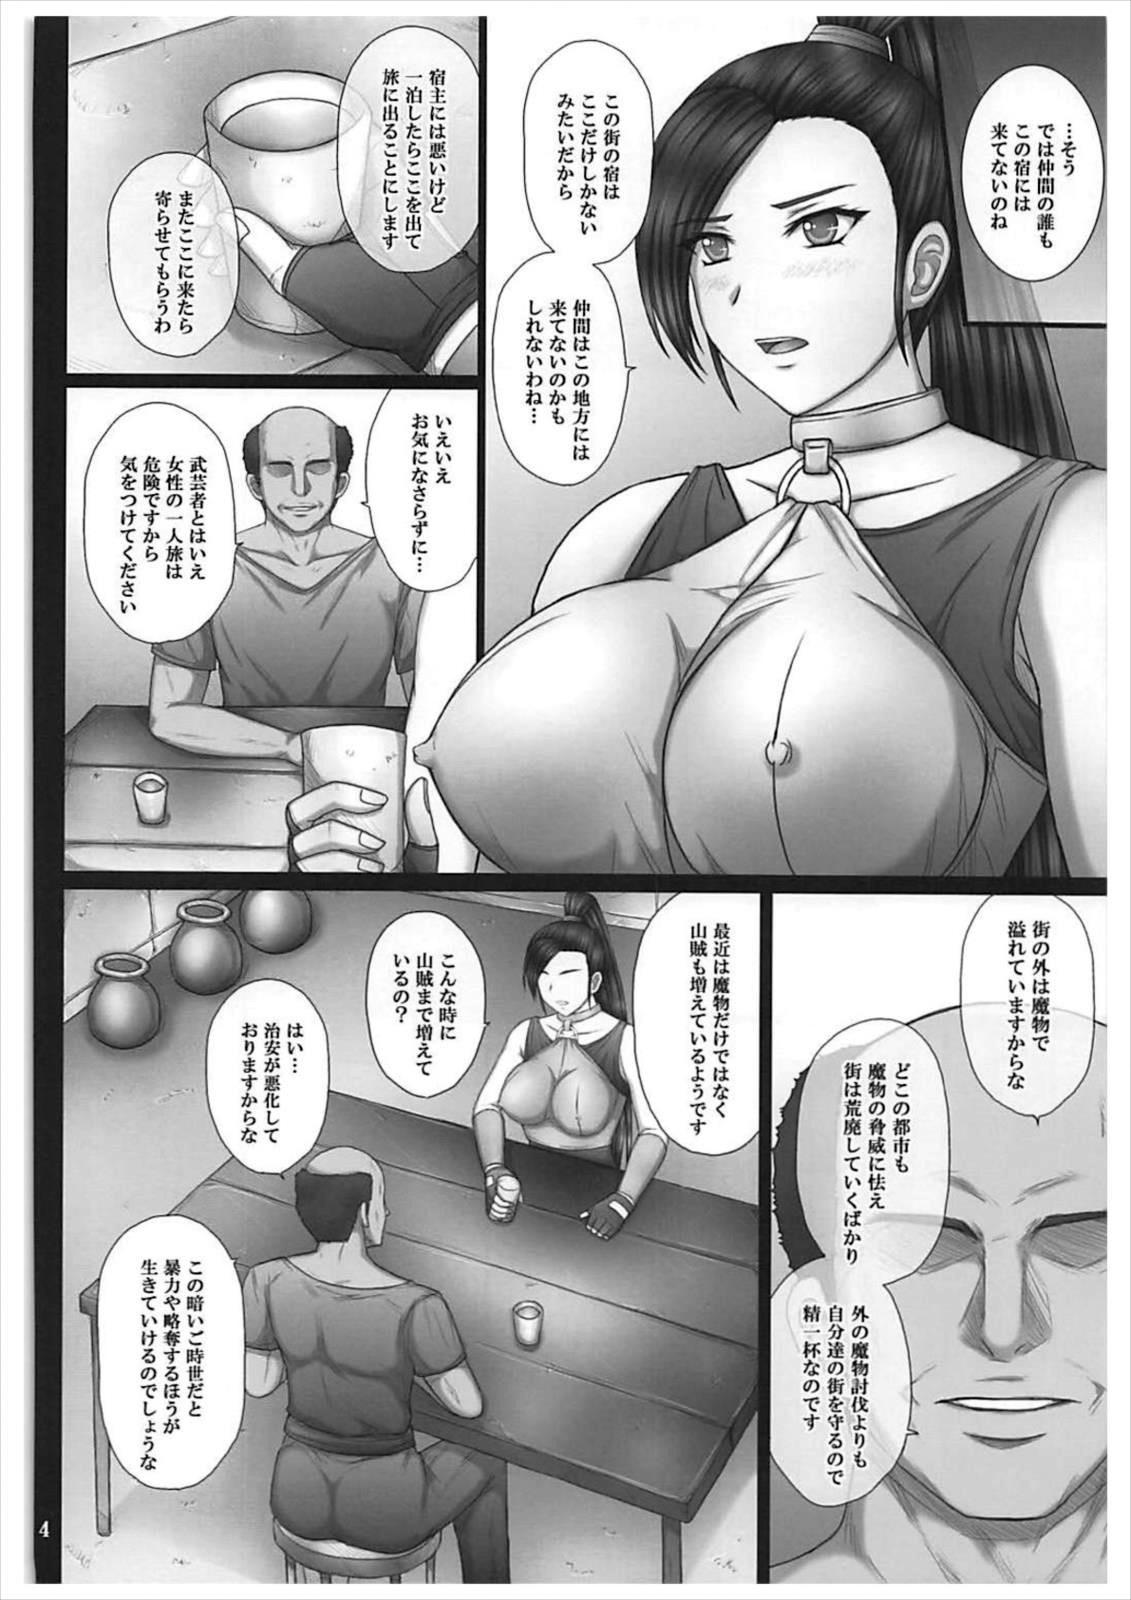 And Dorei ochi butou hime - Dragon quest xi Best Blowjob - Page 3